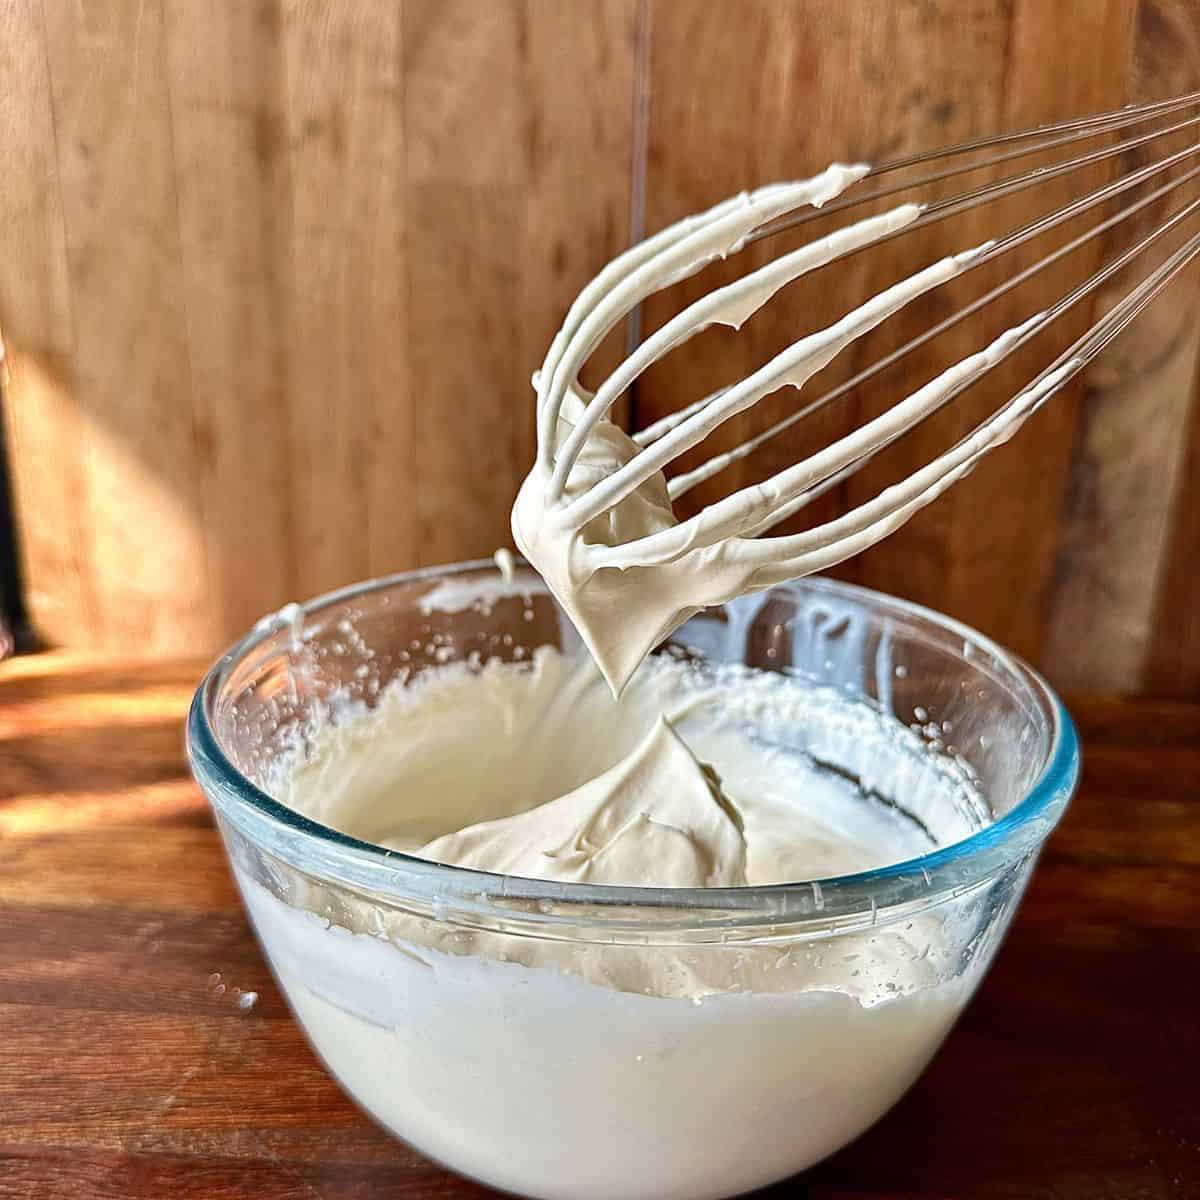 A glass bowl containing whipped vegan cream in soft peaks.